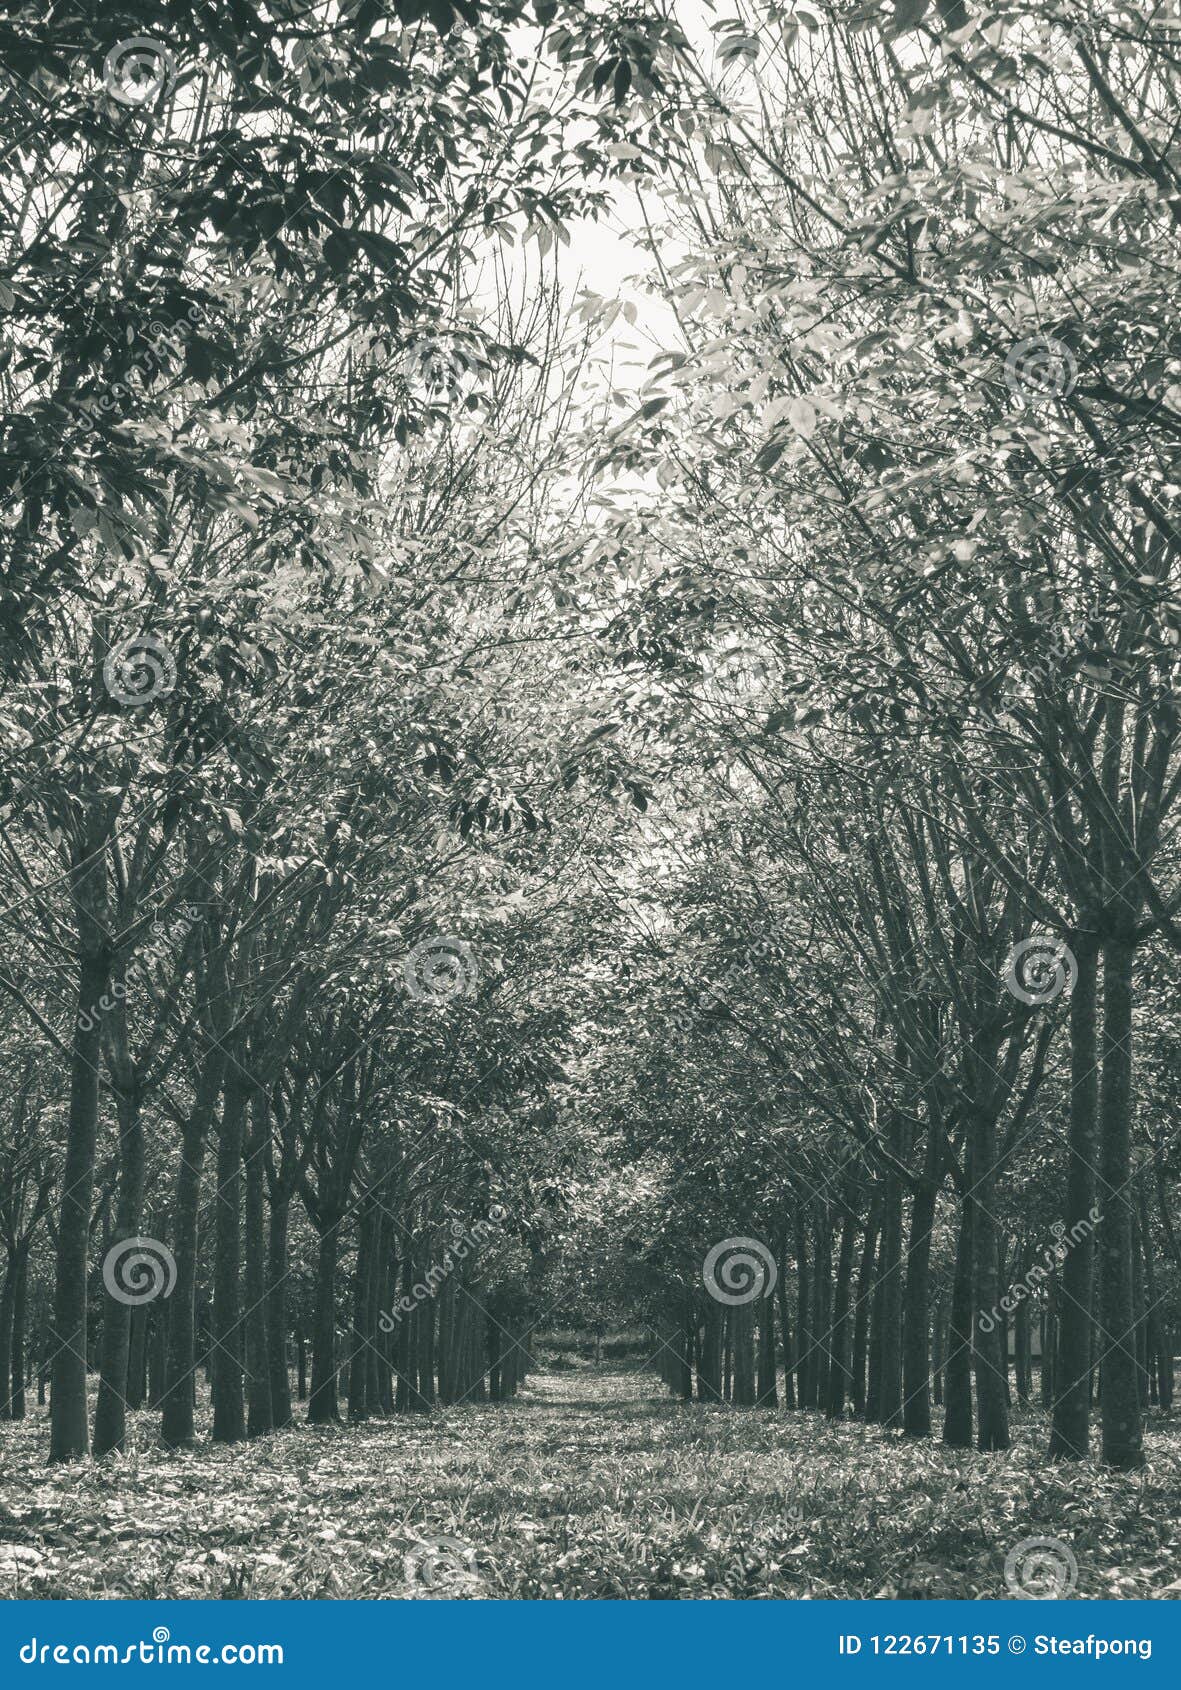 Rubber Tree in Rubber Forest Background Normal View Vertical Black White  Stock Image - Image of garden, parkland: 122671135